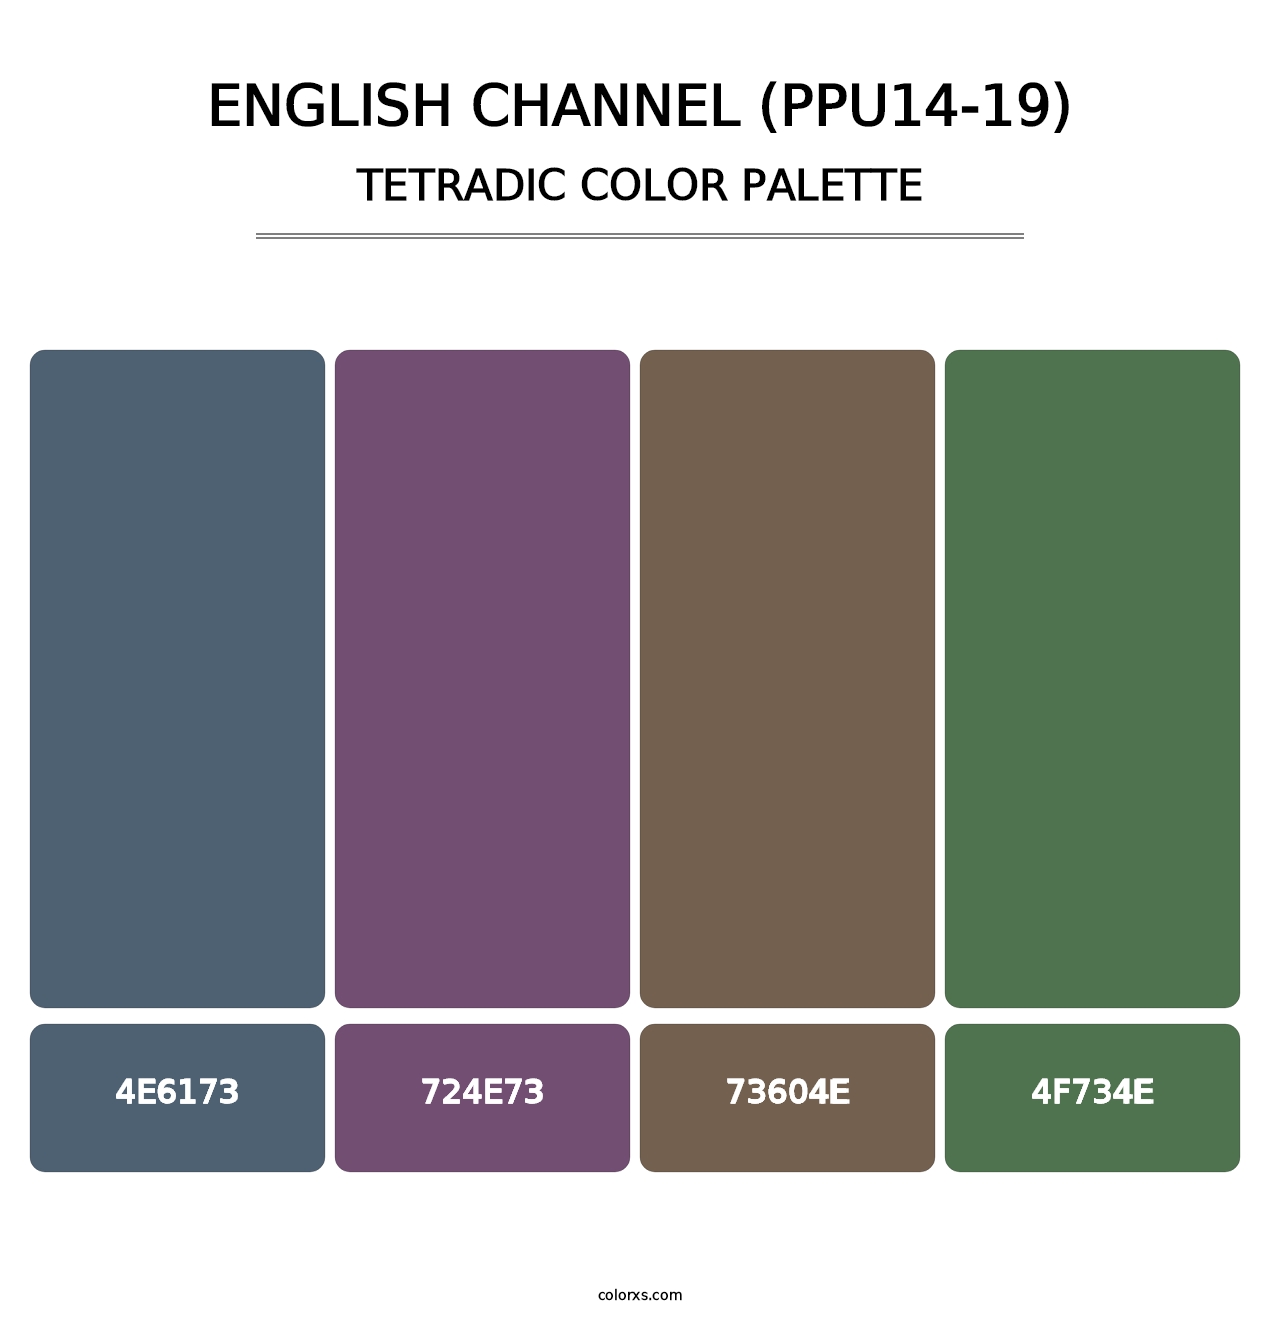 English Channel (PPU14-19) - Tetradic Color Palette